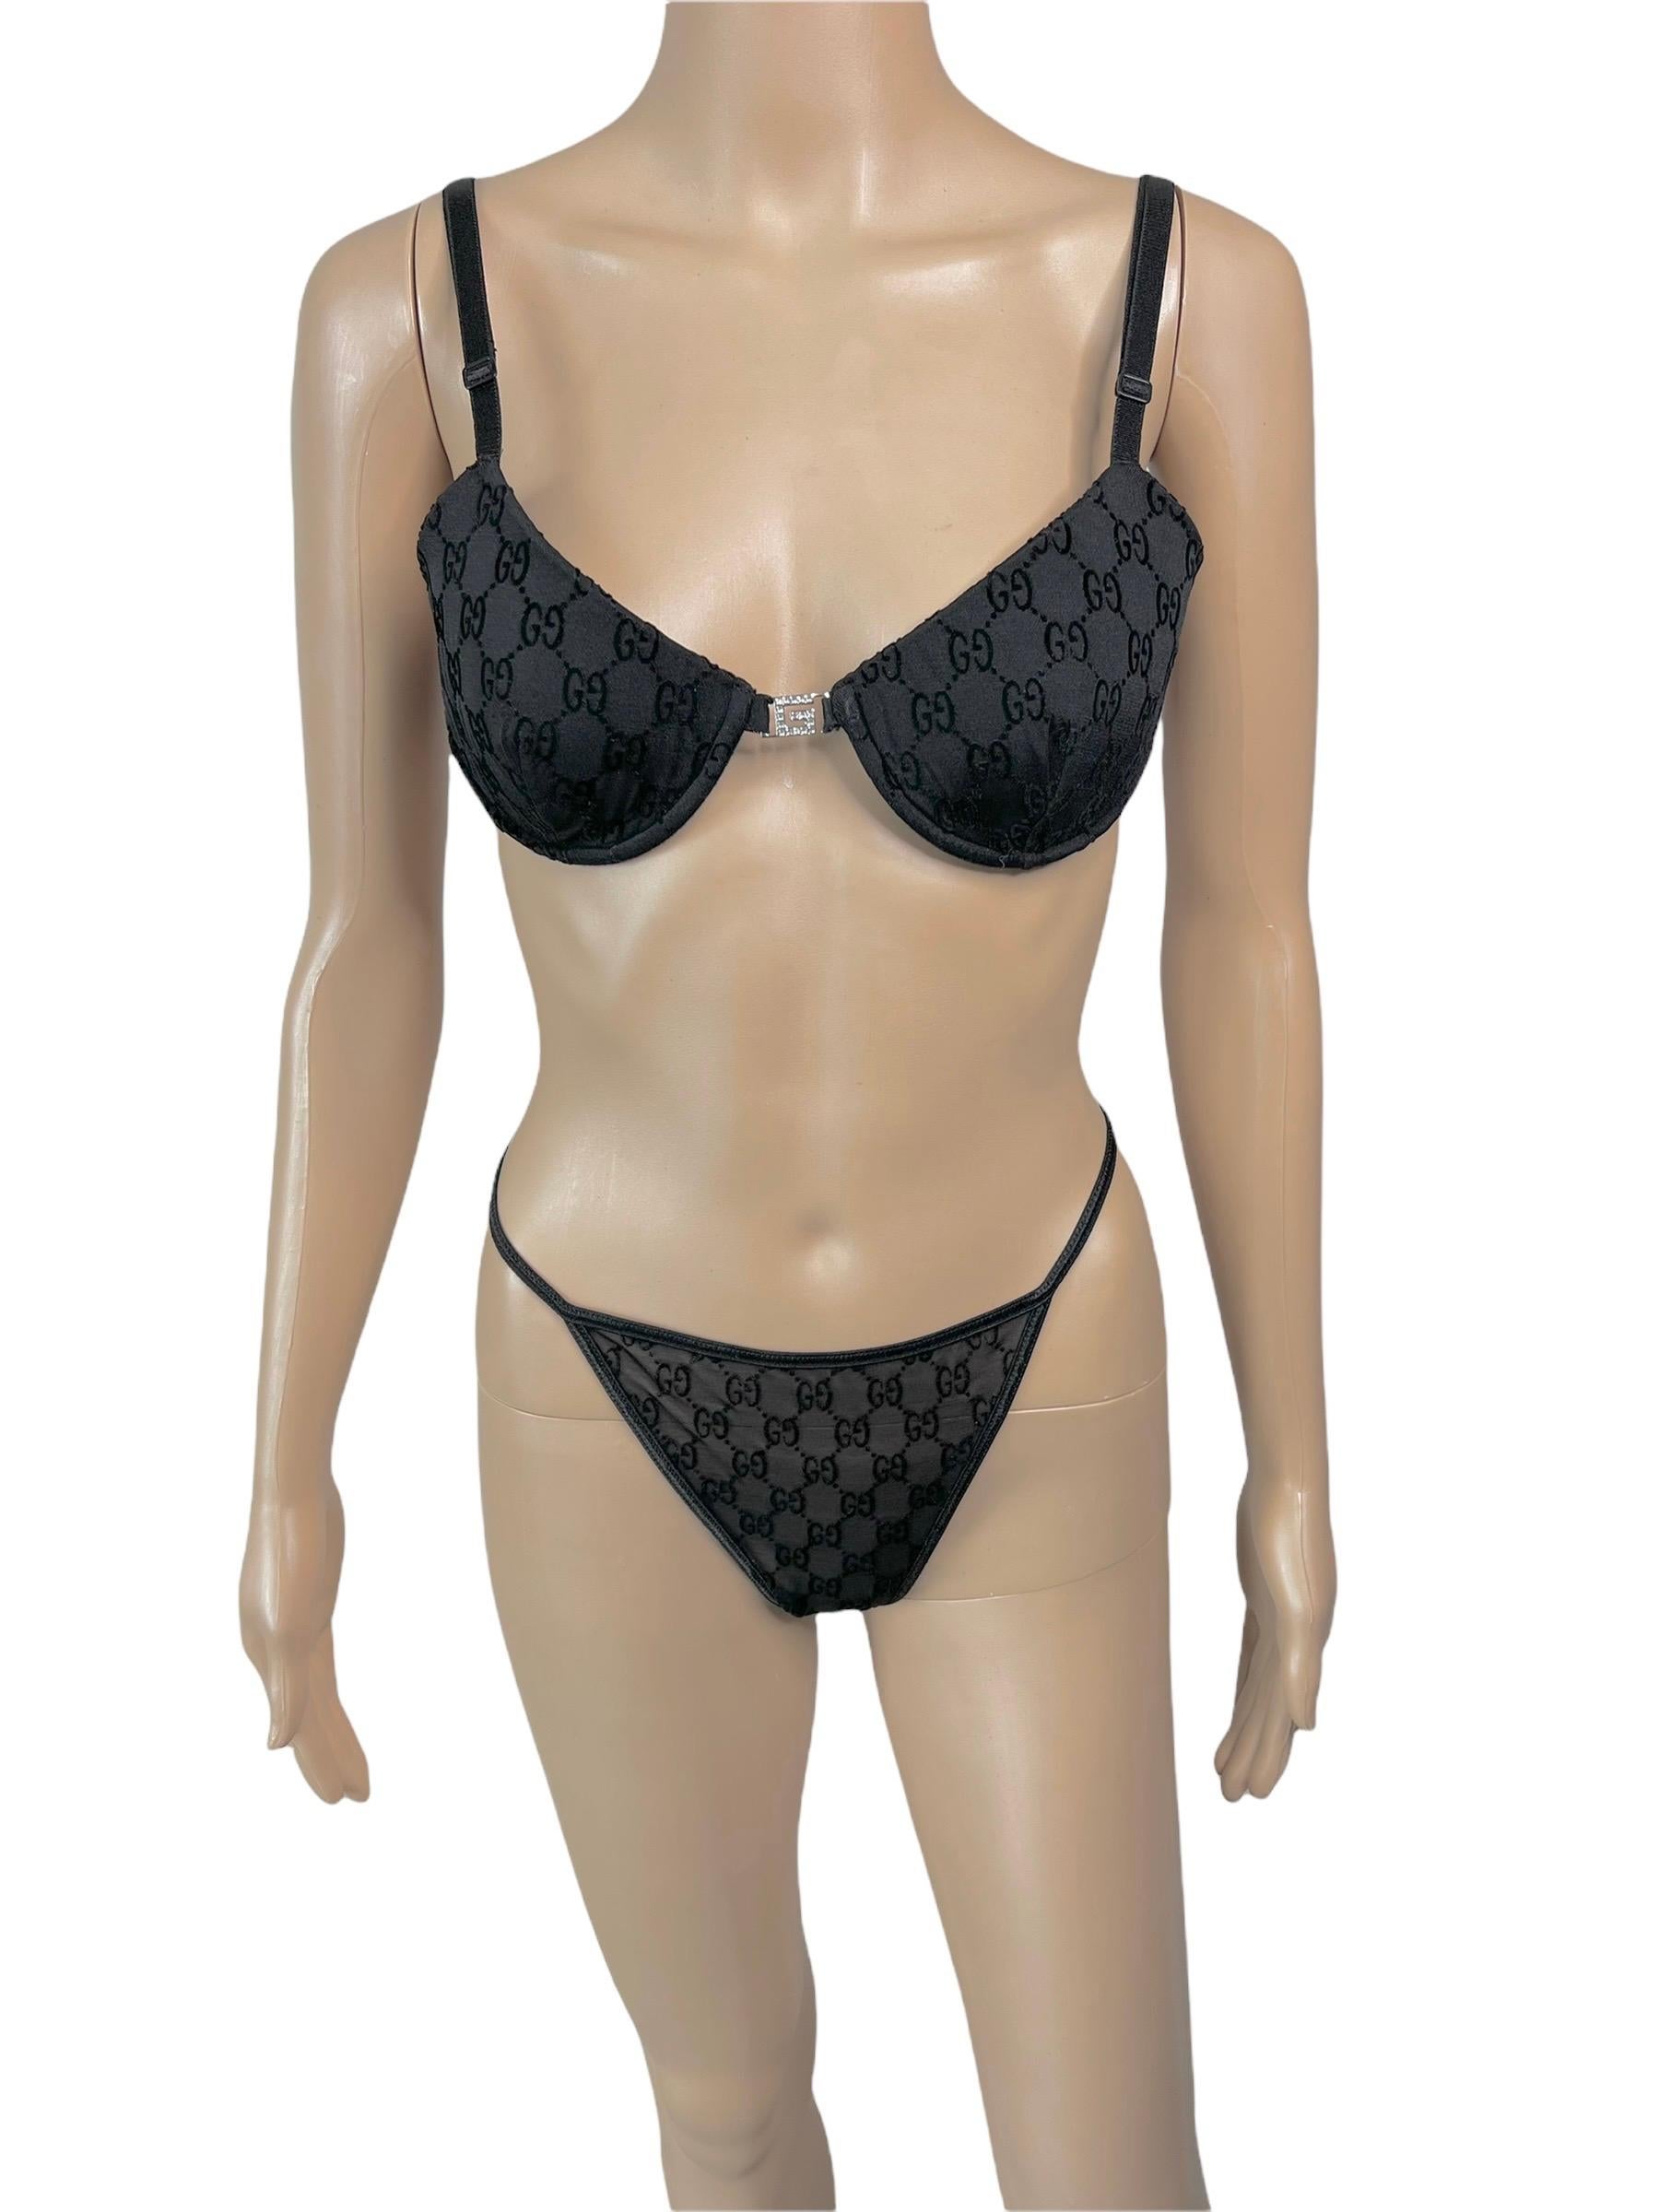 Tom Ford for Gucci S/S 1998 Runway Logo Monogram Bra & Bikini & Sheer Mesh Mini Dress Lingerie 3 Piece Set  

Please note the bra and the dress are size S and the bikini is size M.
